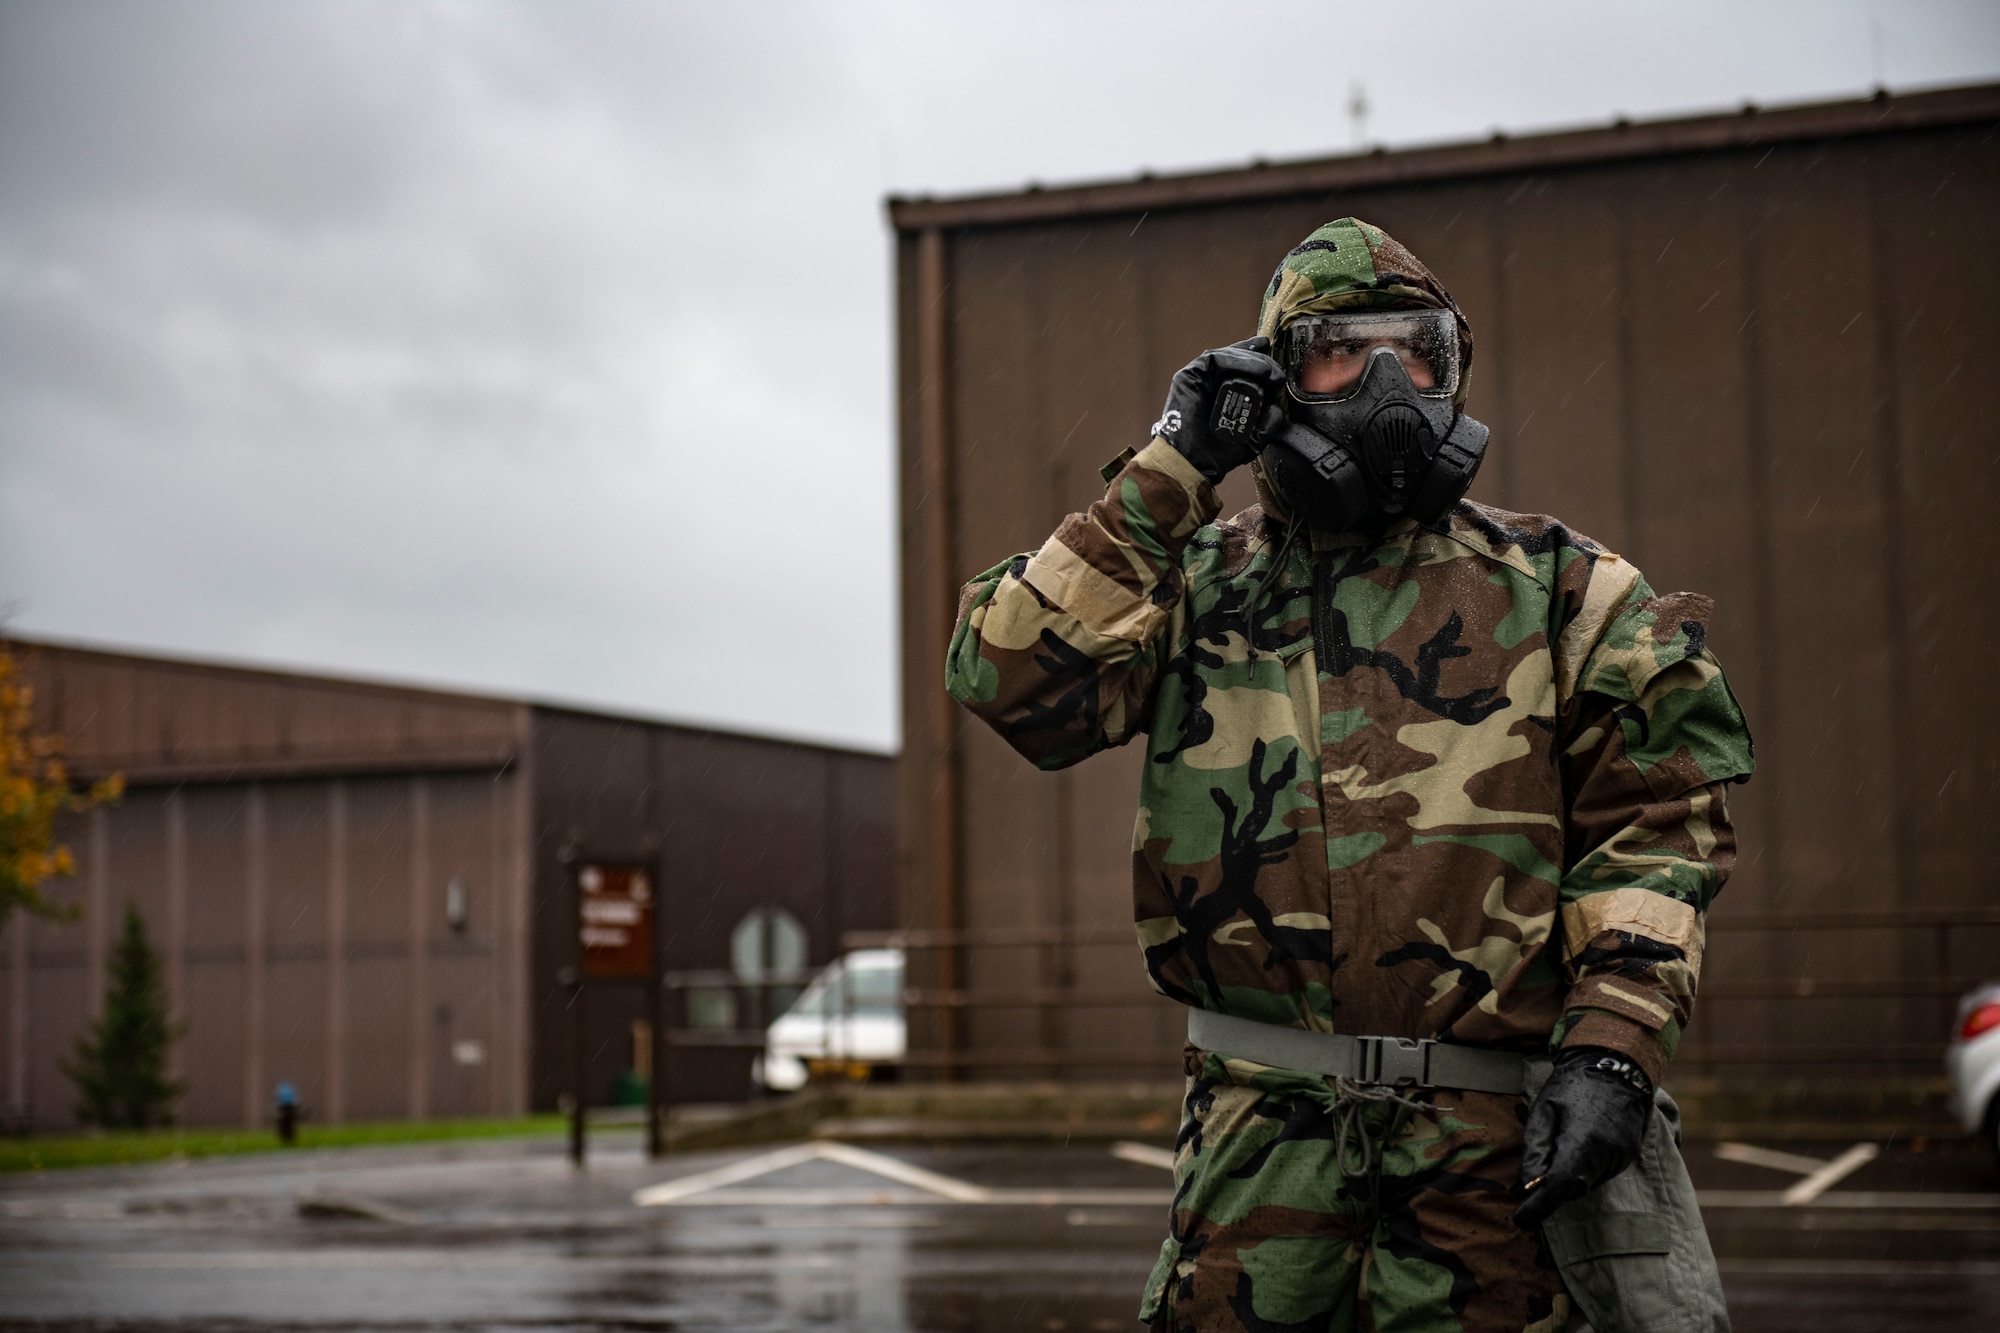 An Airman from the 423d Security Forces Squadron listens to his radio at RAF Alconbury